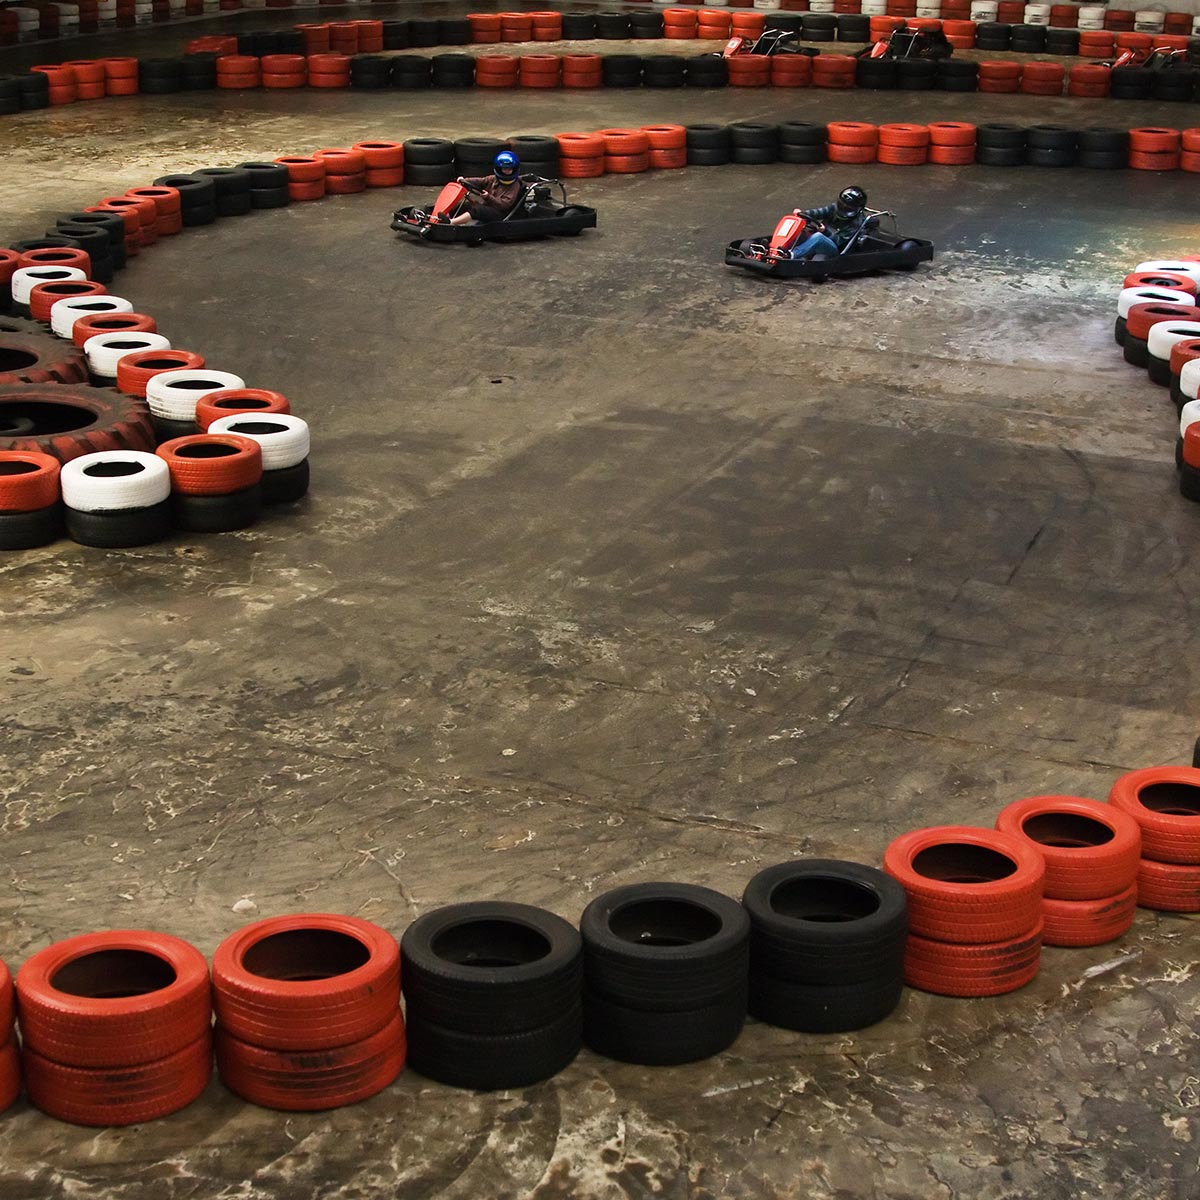 50 Lap Karting Race for Two